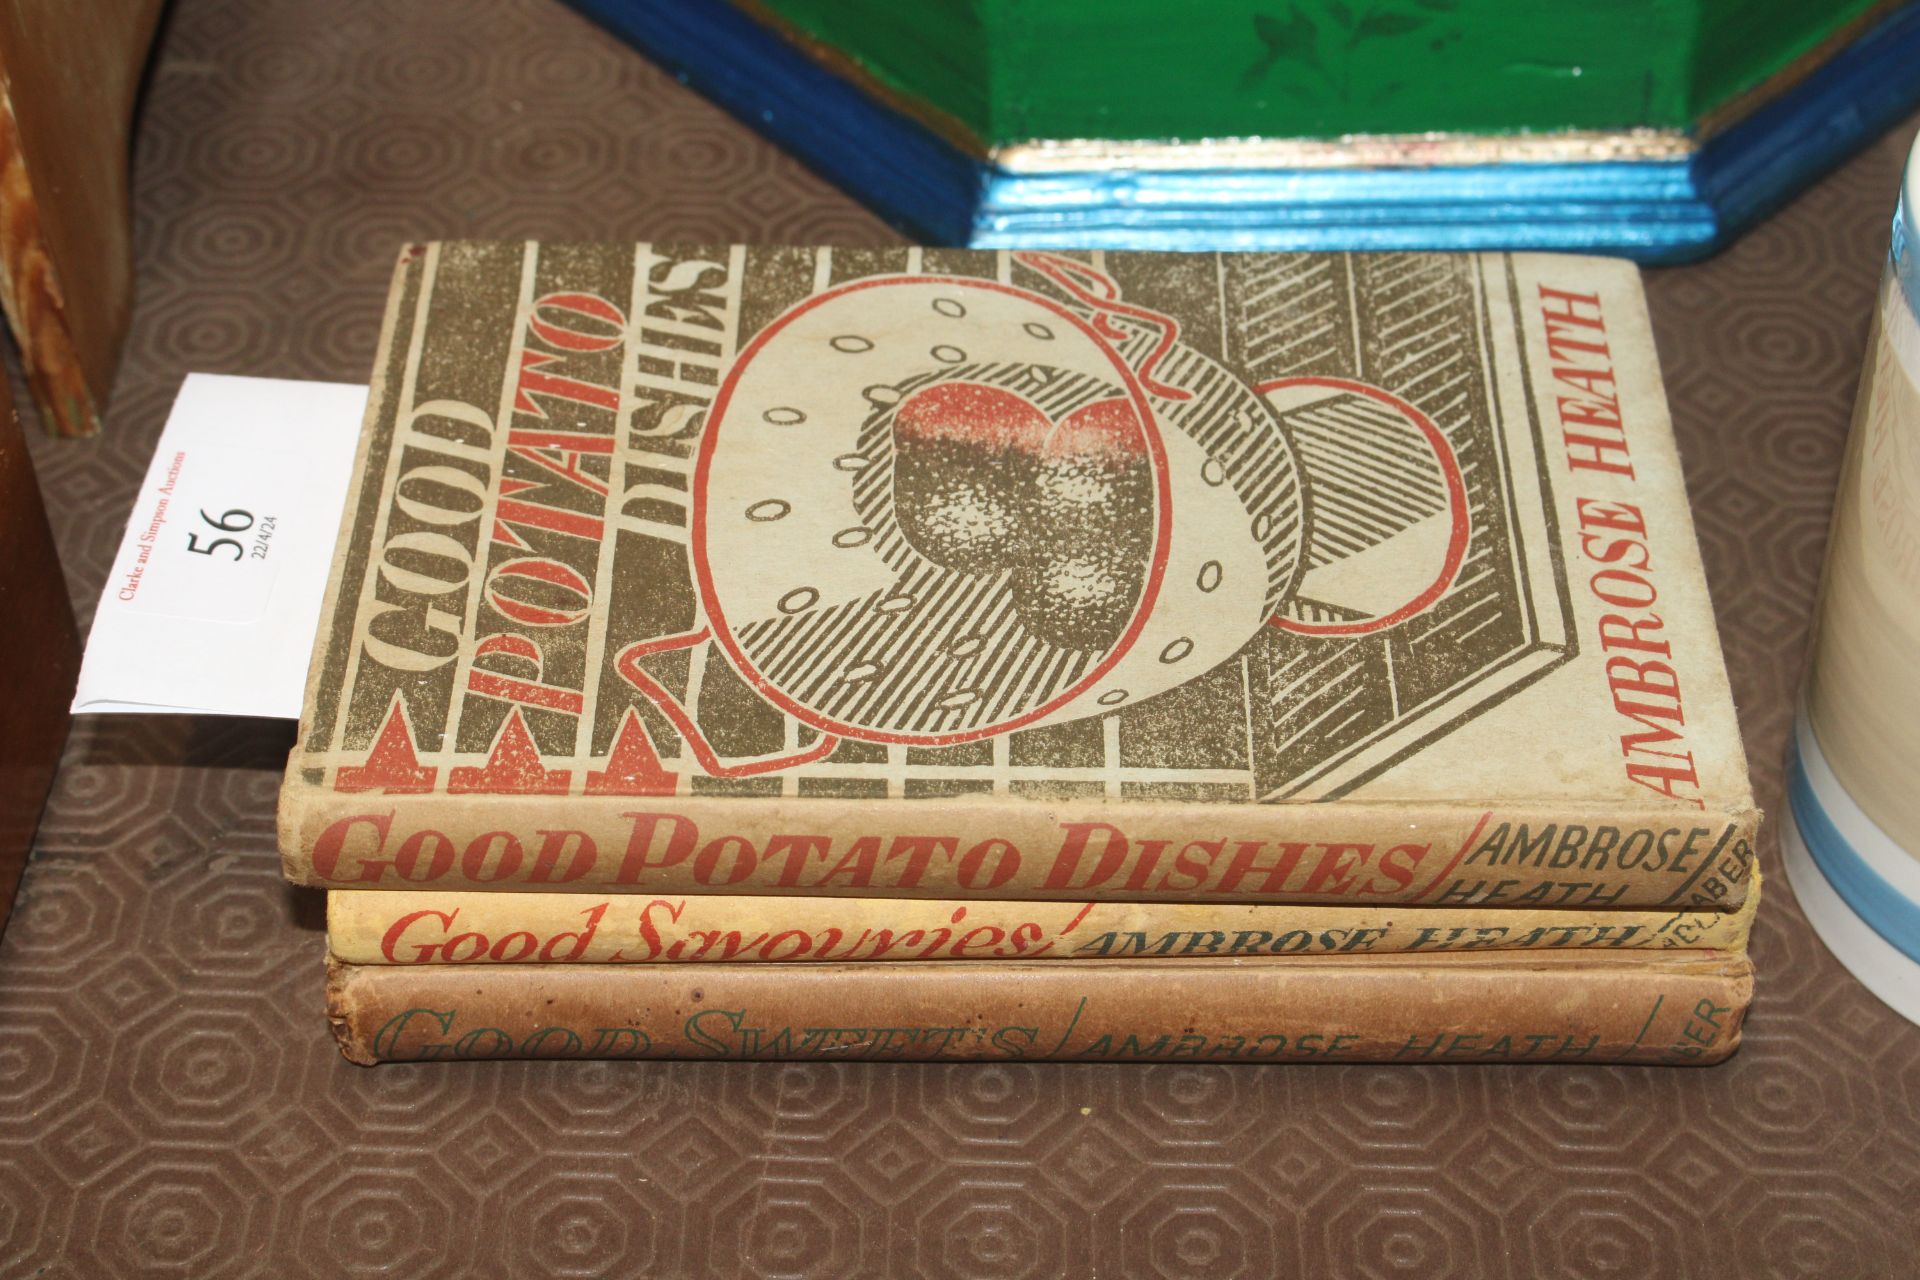 Edward Bawden and Ambrose Heath, two First Editions and one other vintage cookery books, "Good